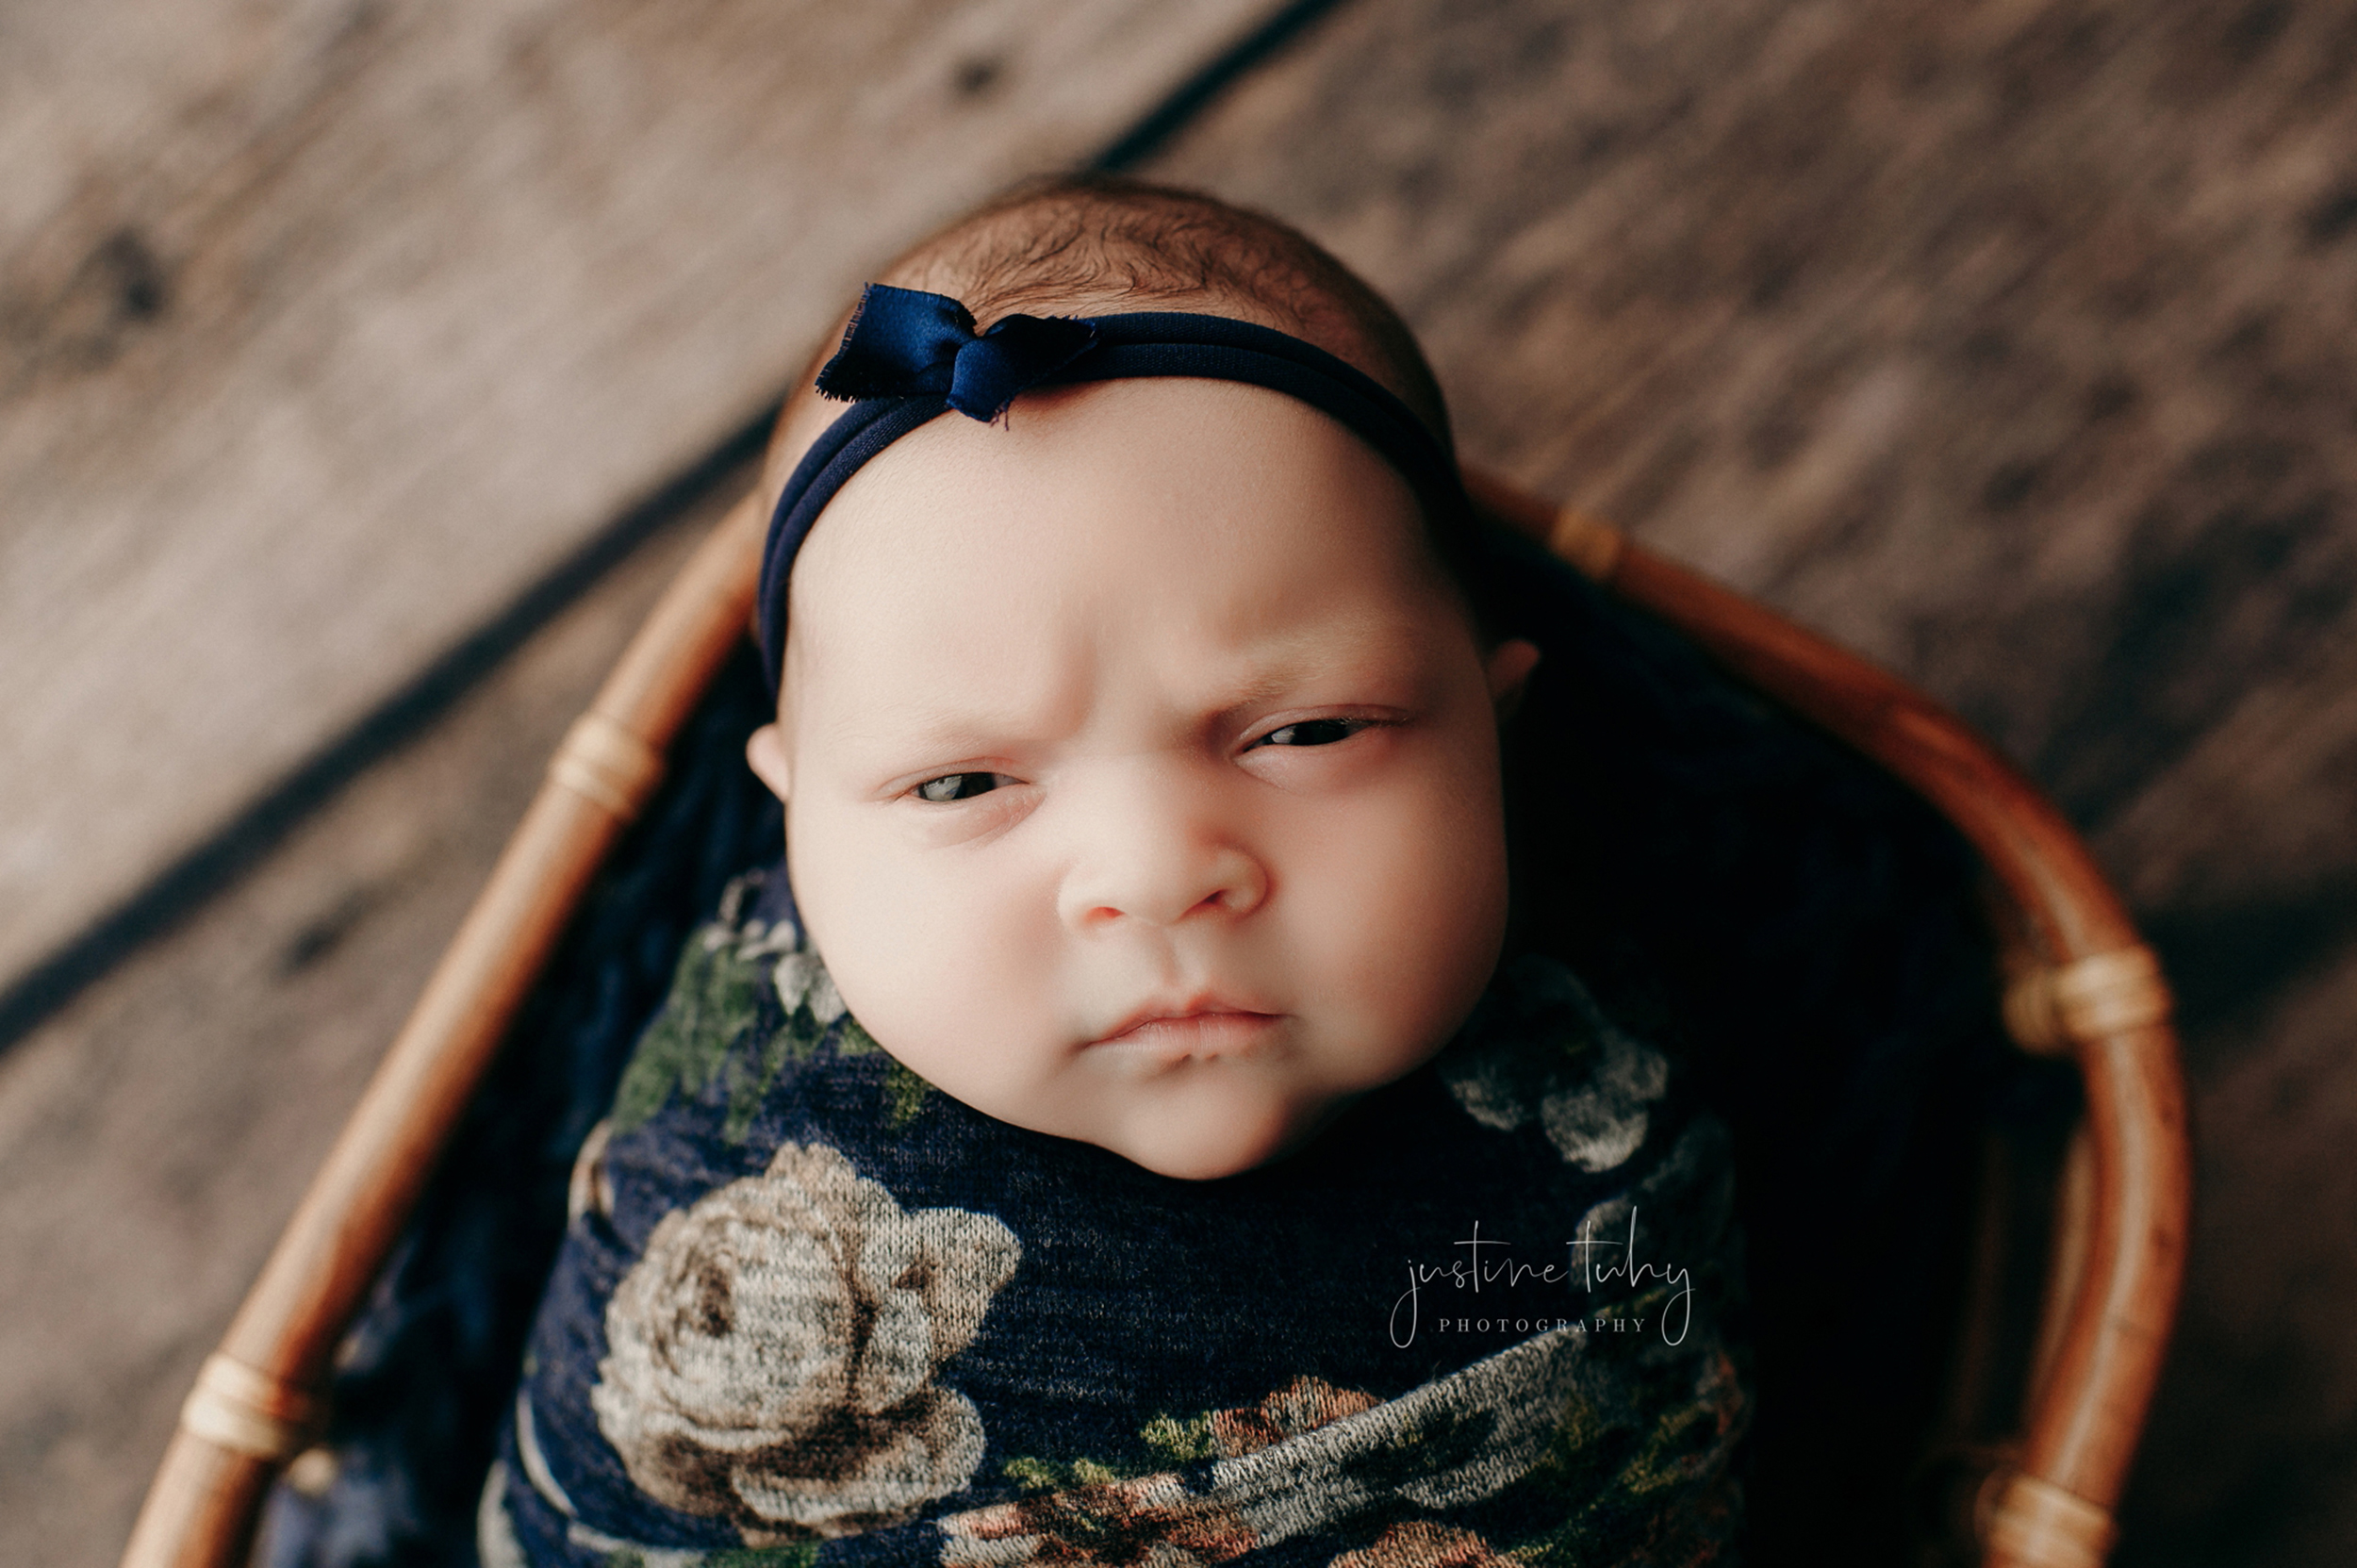 I love the mean mug': Baby's photo shoot scowl goes viral